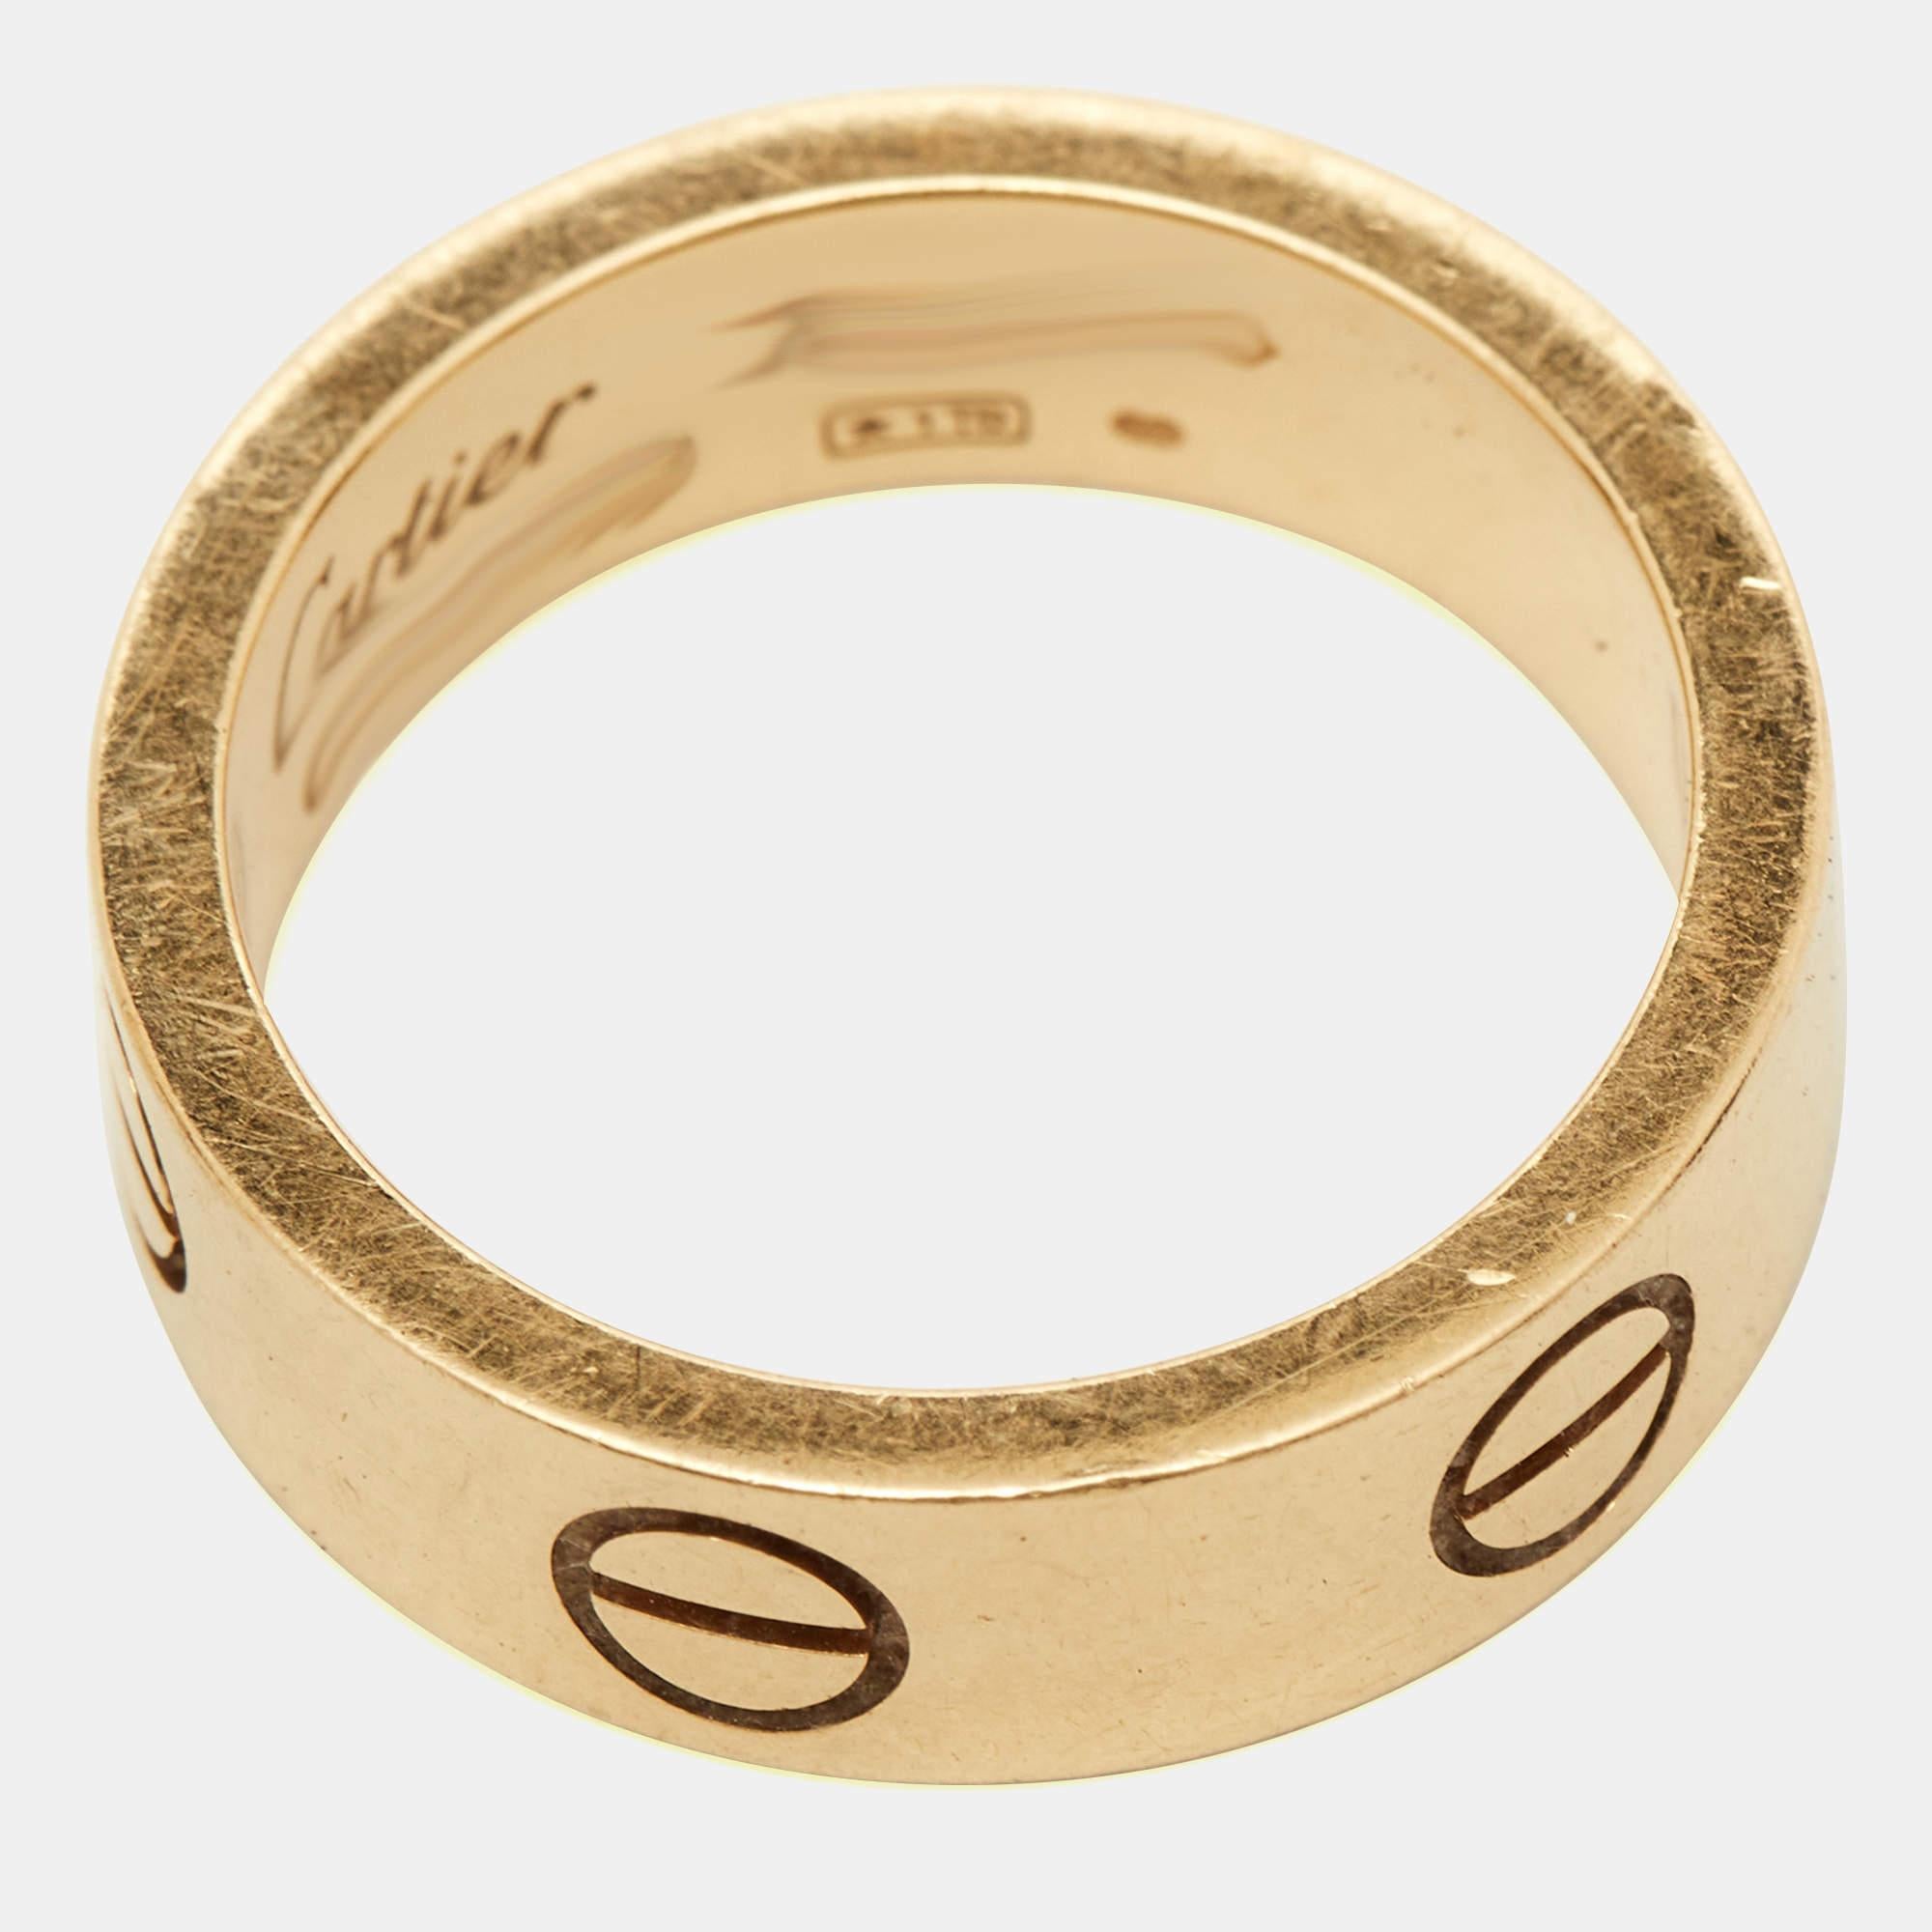 This stunning Love ring is an icon of style and luxury. Constructed in 18k yellow gold, this ring features screw details all around the surface as symbols of a sealed and secured bond. This ring is sure to become your everyday essential.

